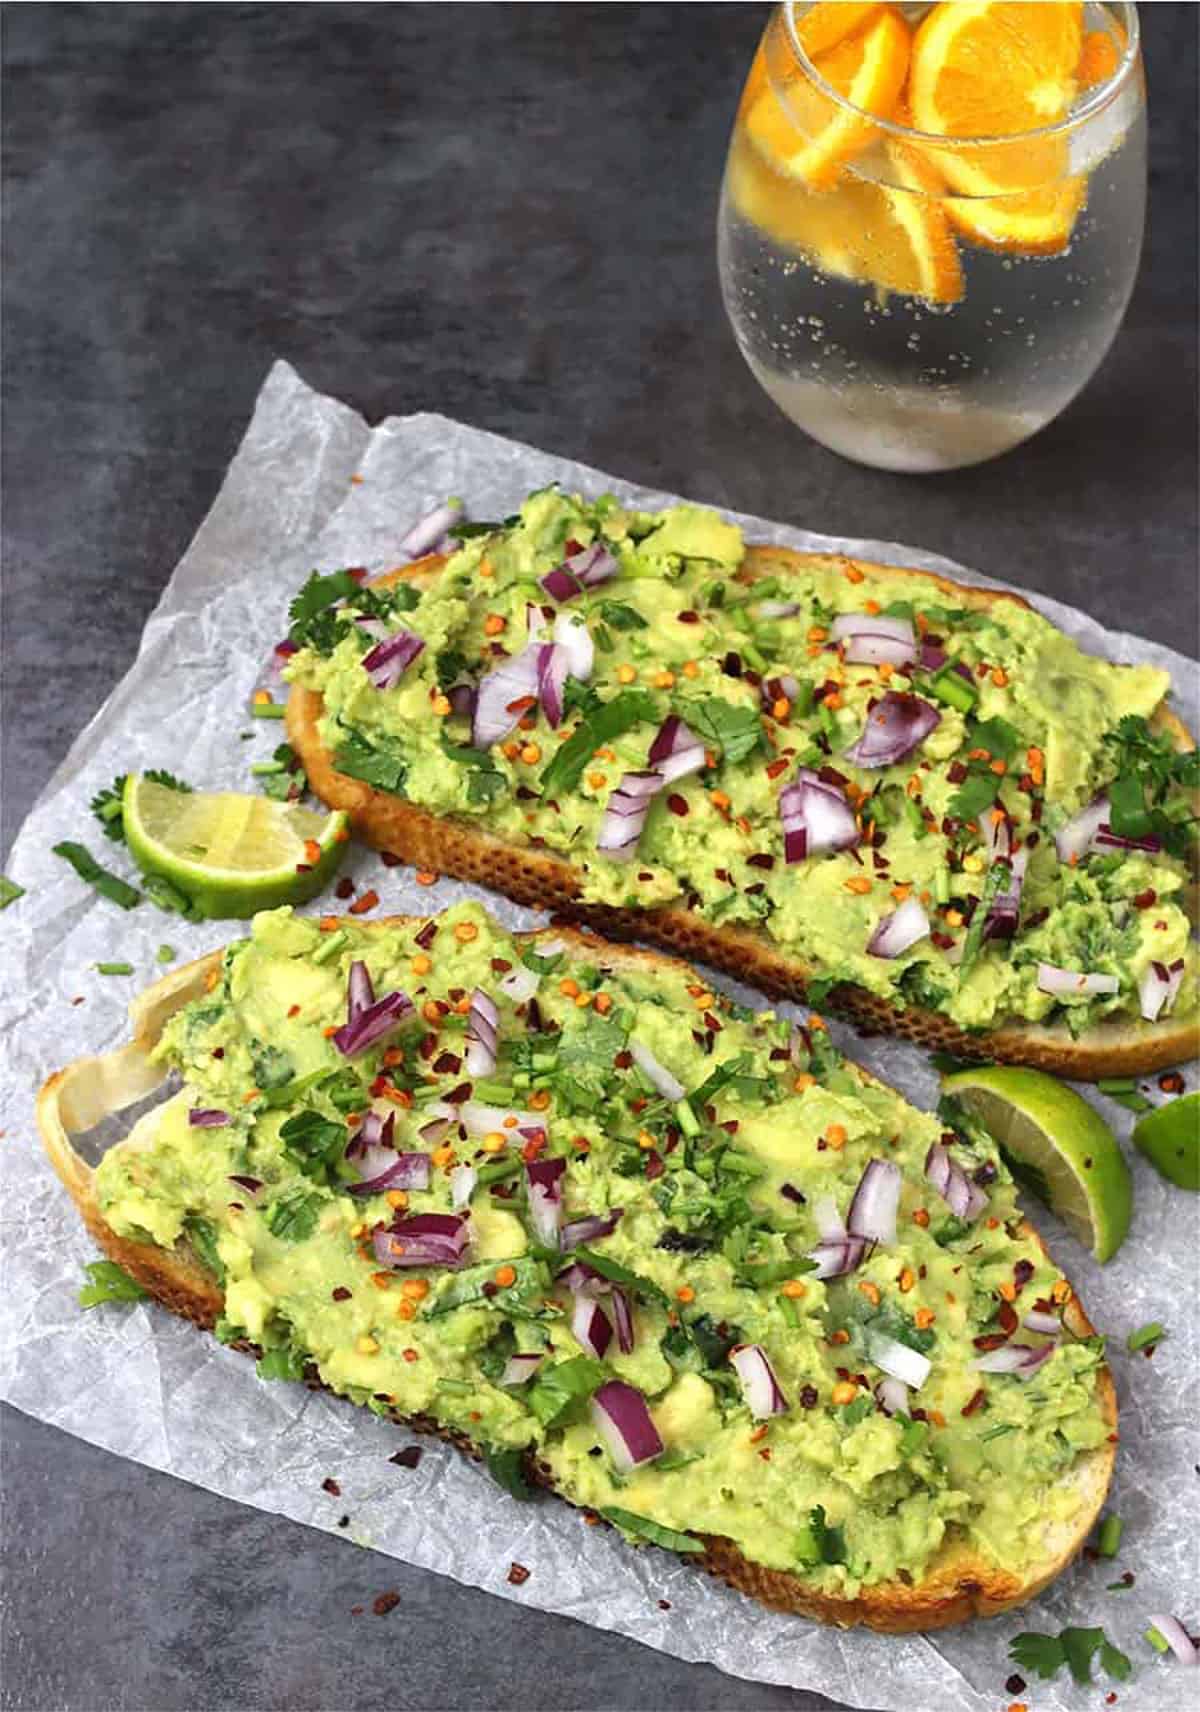 Best guacamole toasts served with sparkling water with orange wedges.